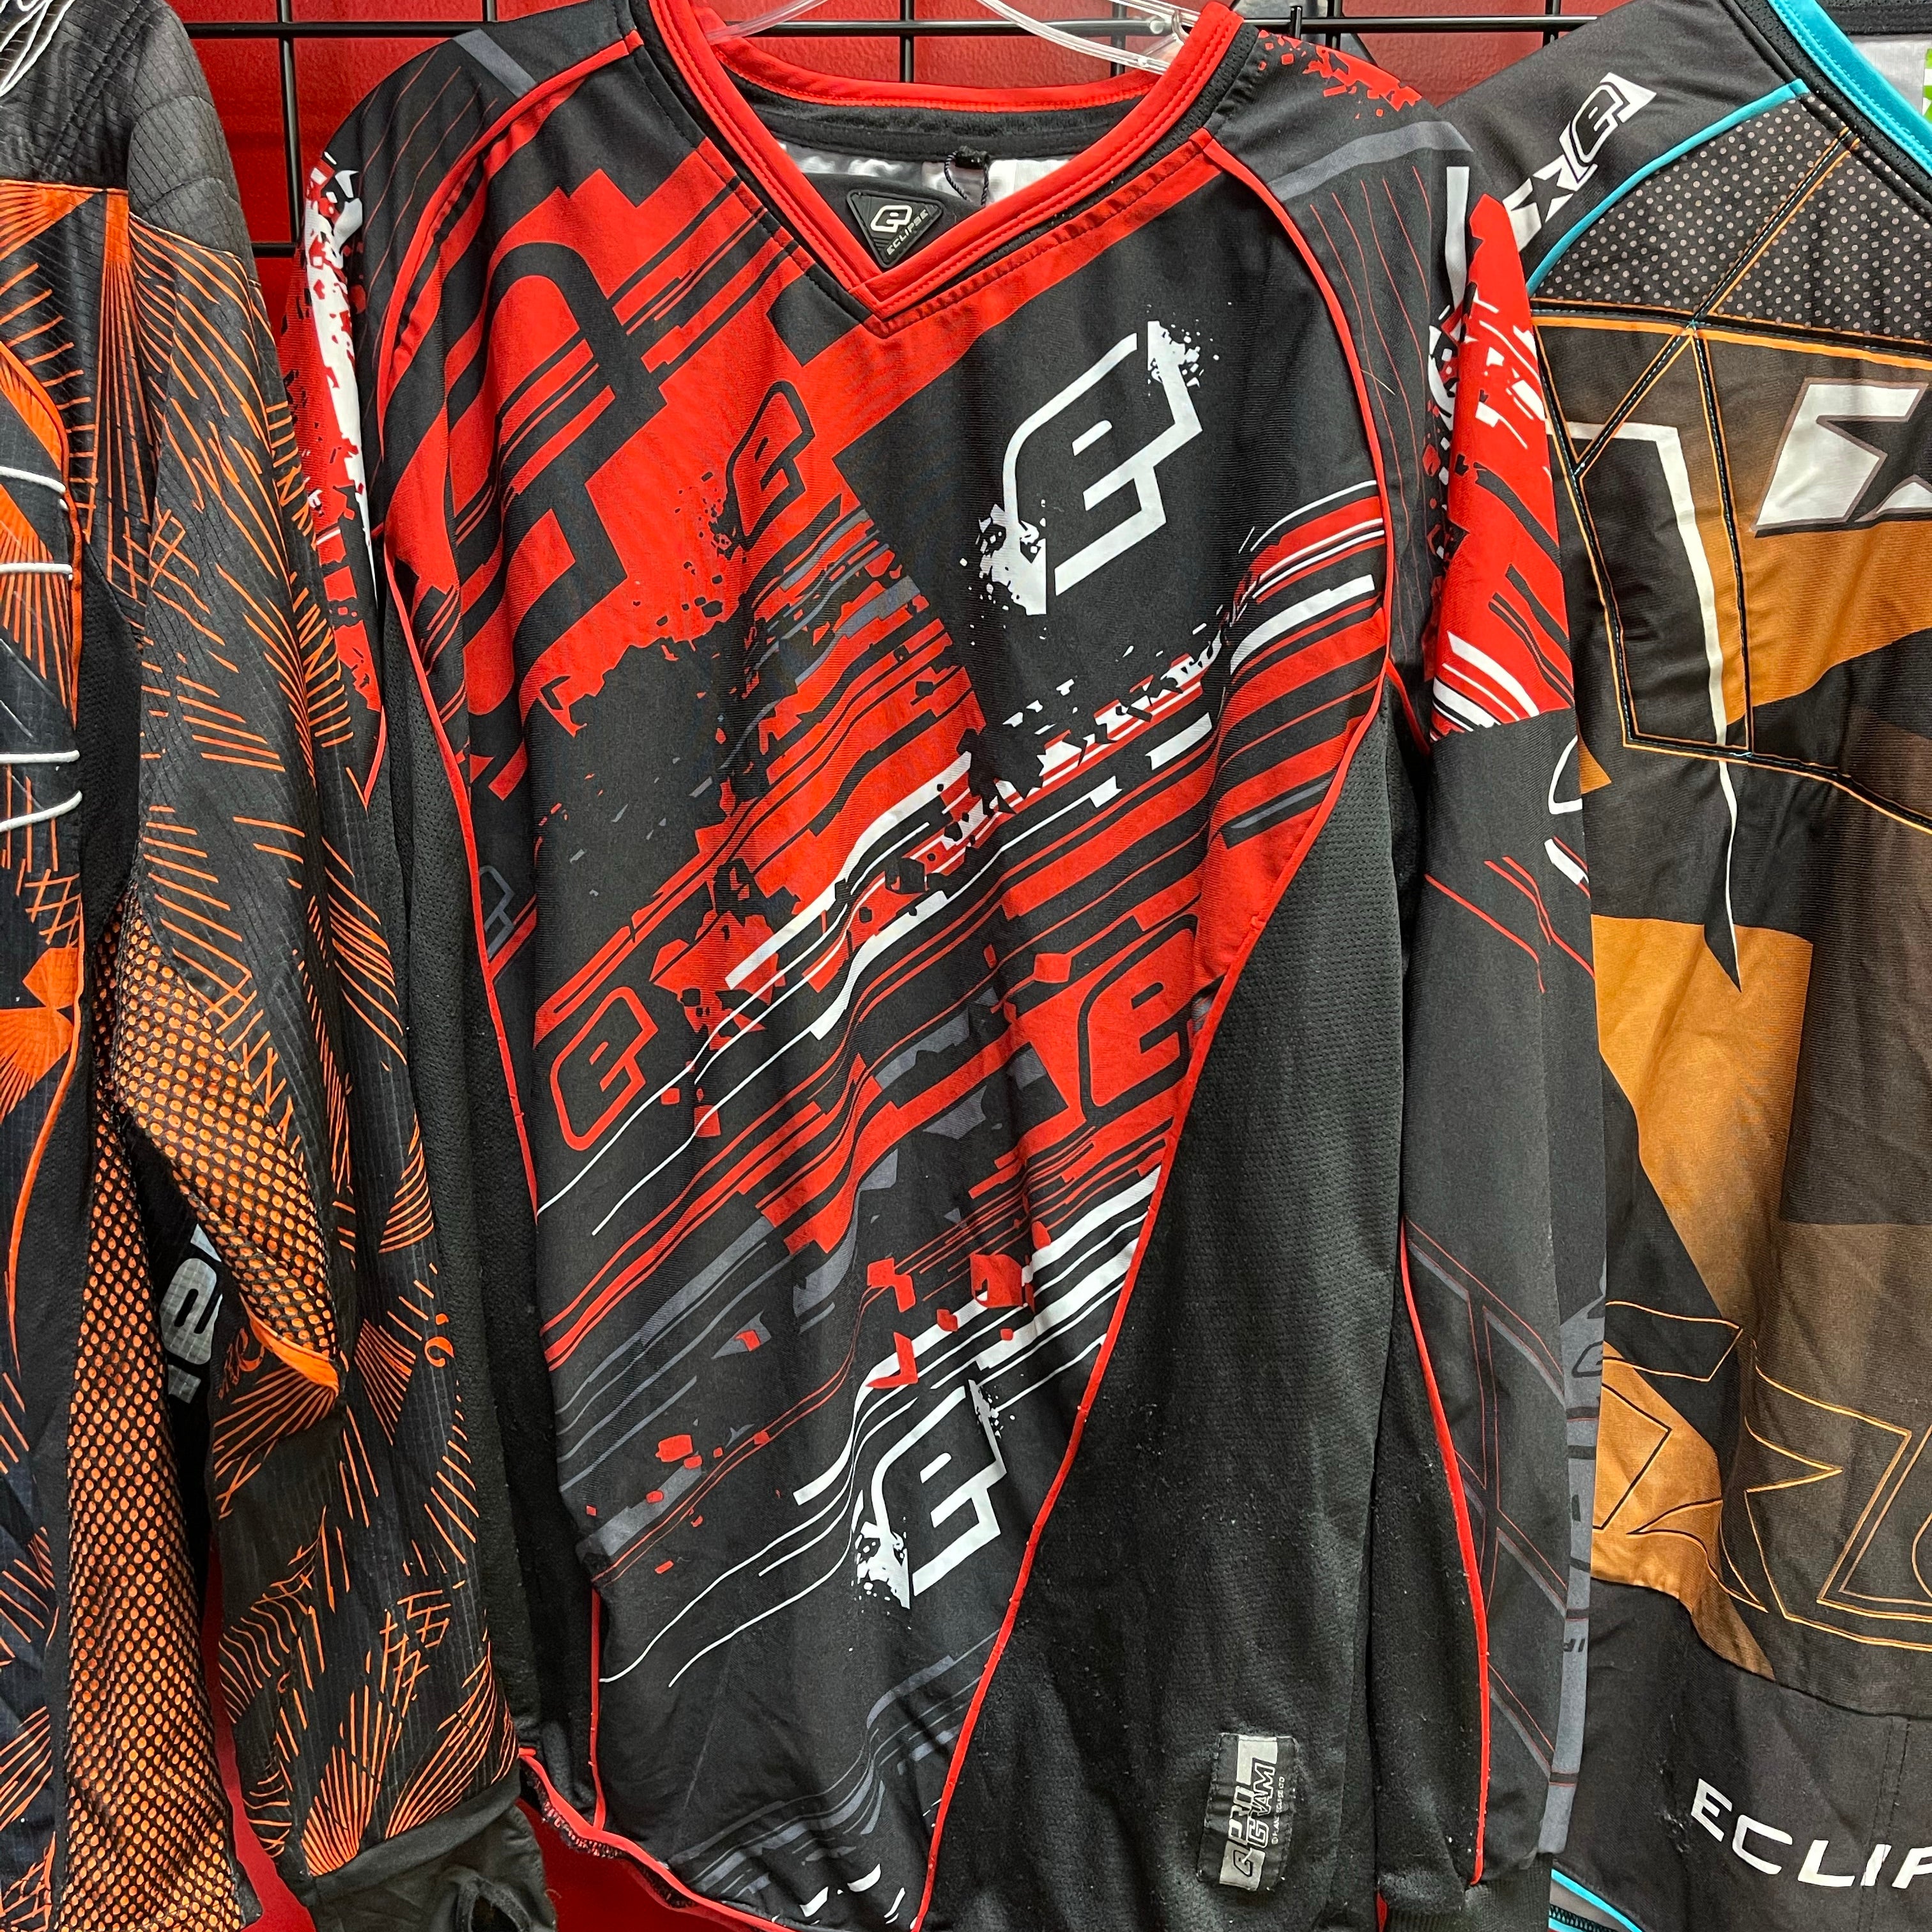 Used Paintball Jerseys (3 Pack)- Large